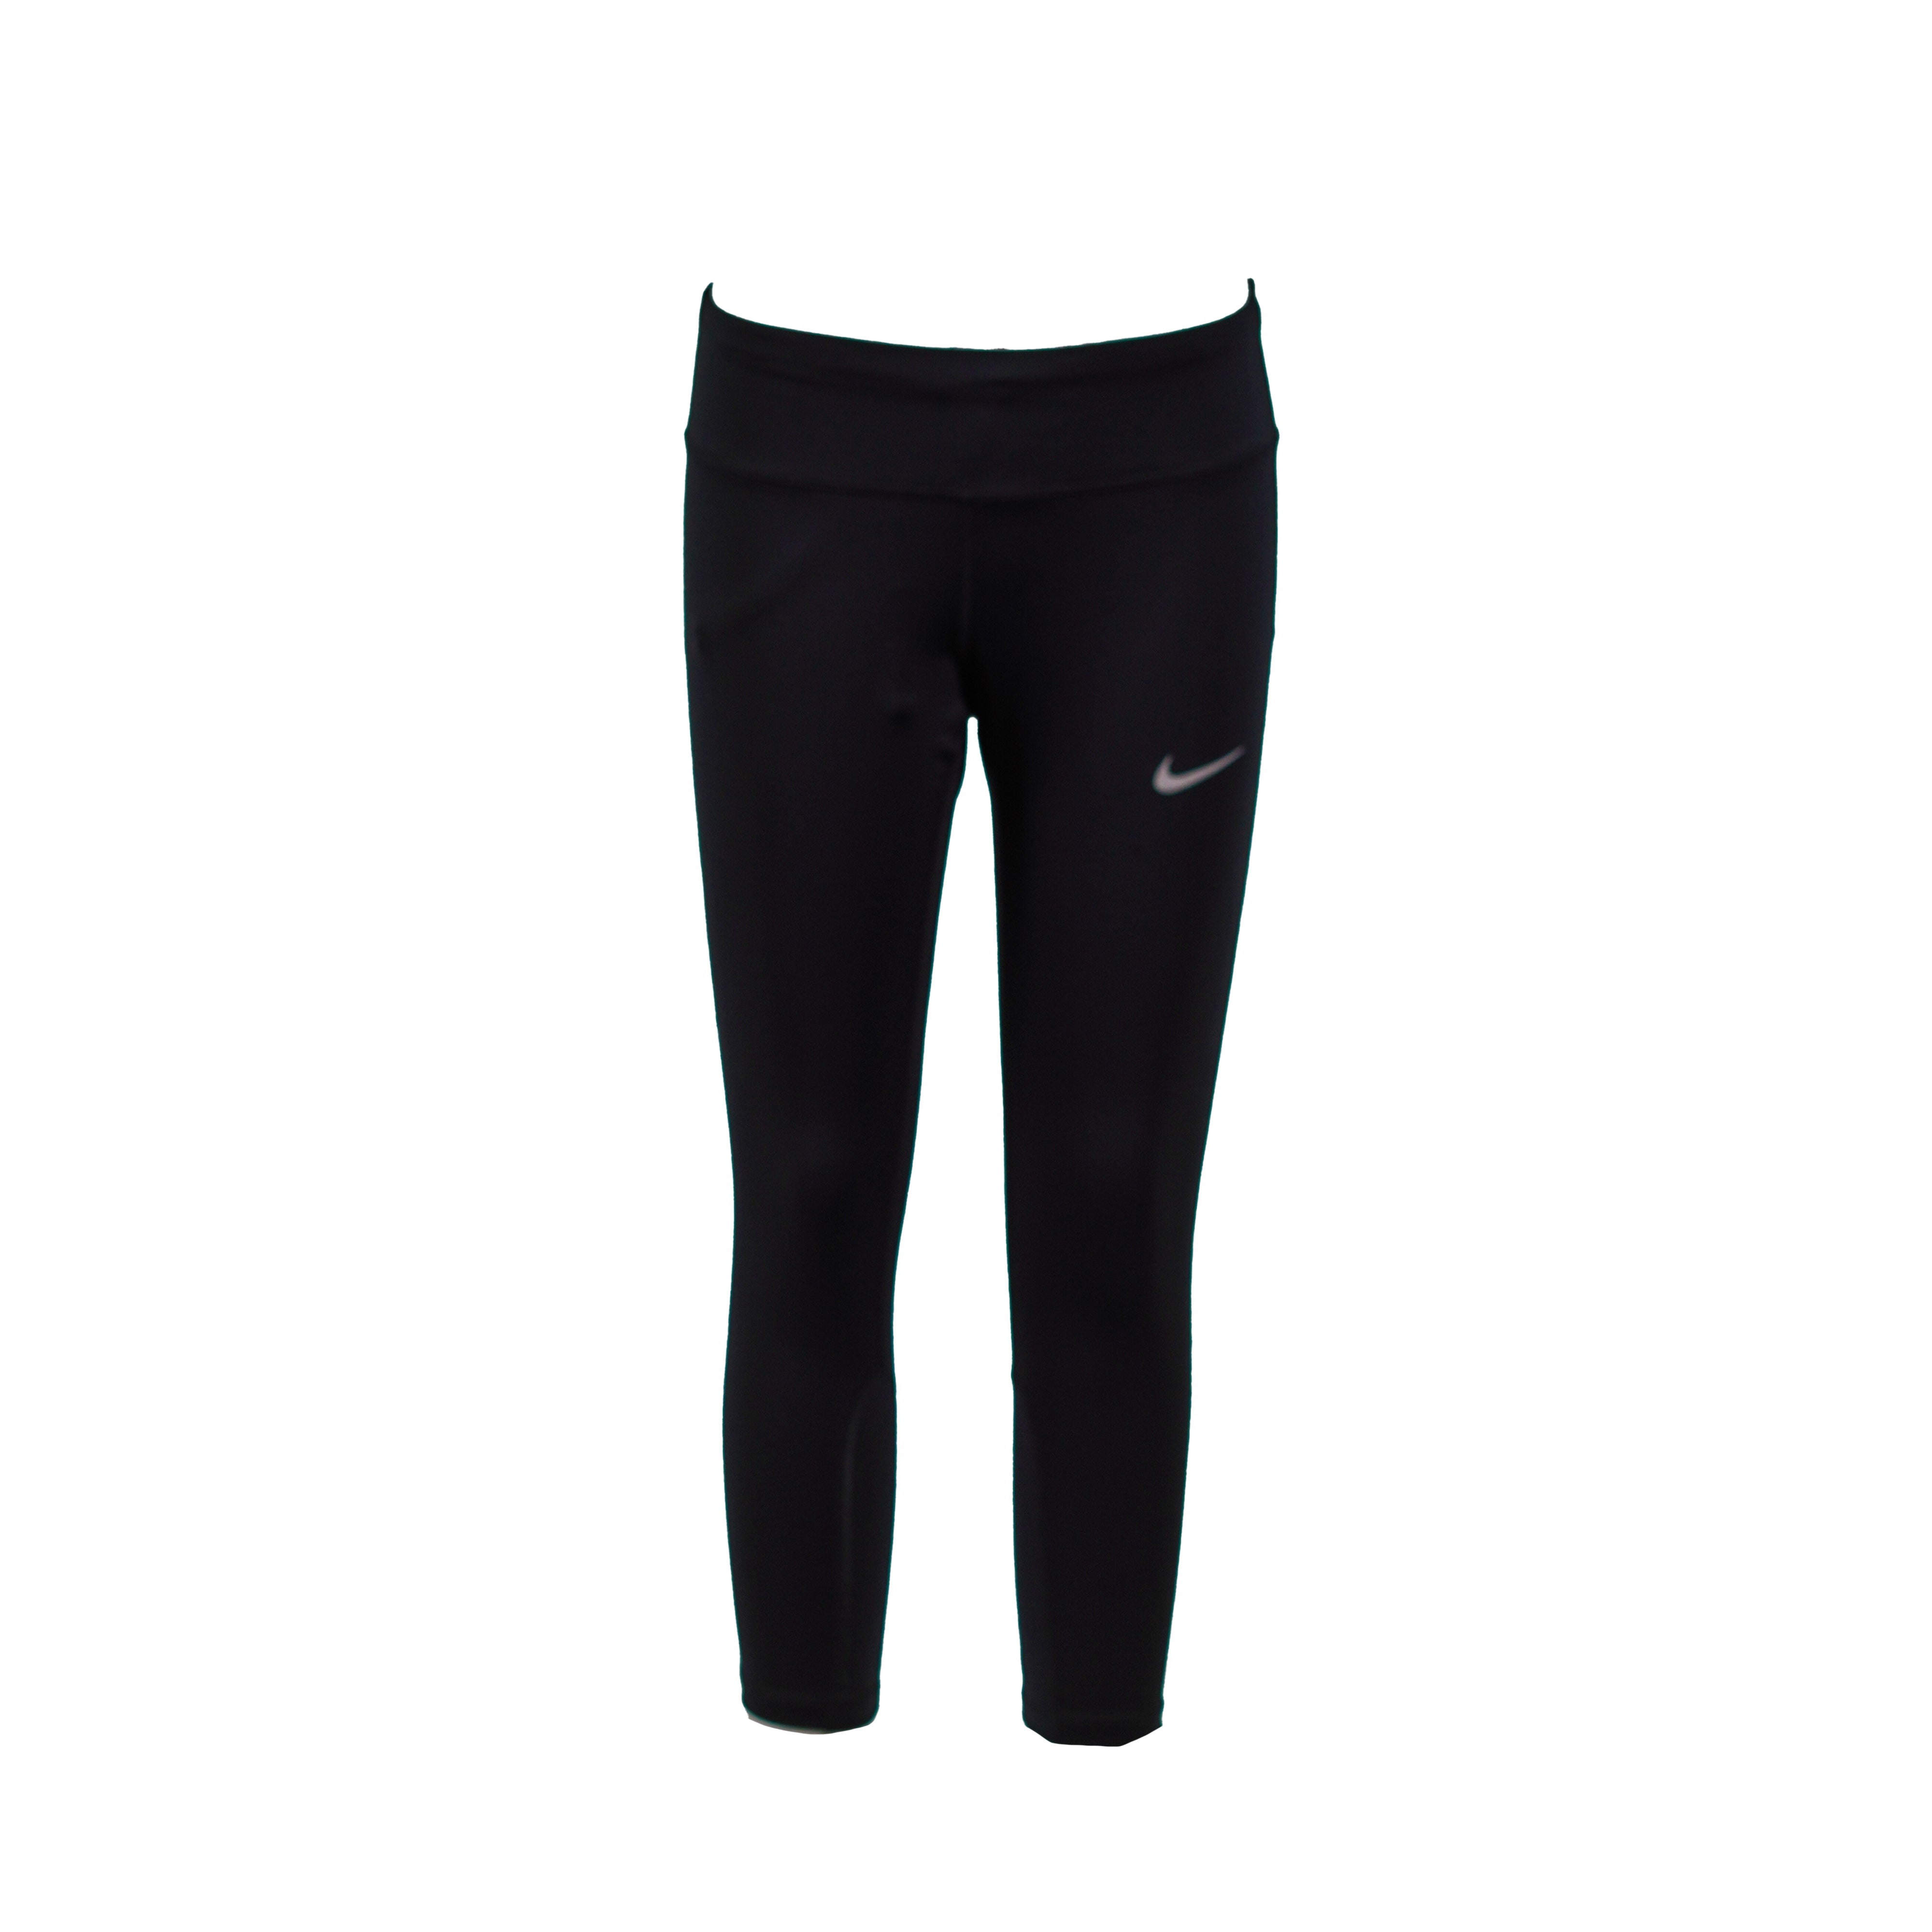 Nike Women's Epic Run Tight Fit Running Capri Tights Black Size Small – The  Uber Shop Retail Store